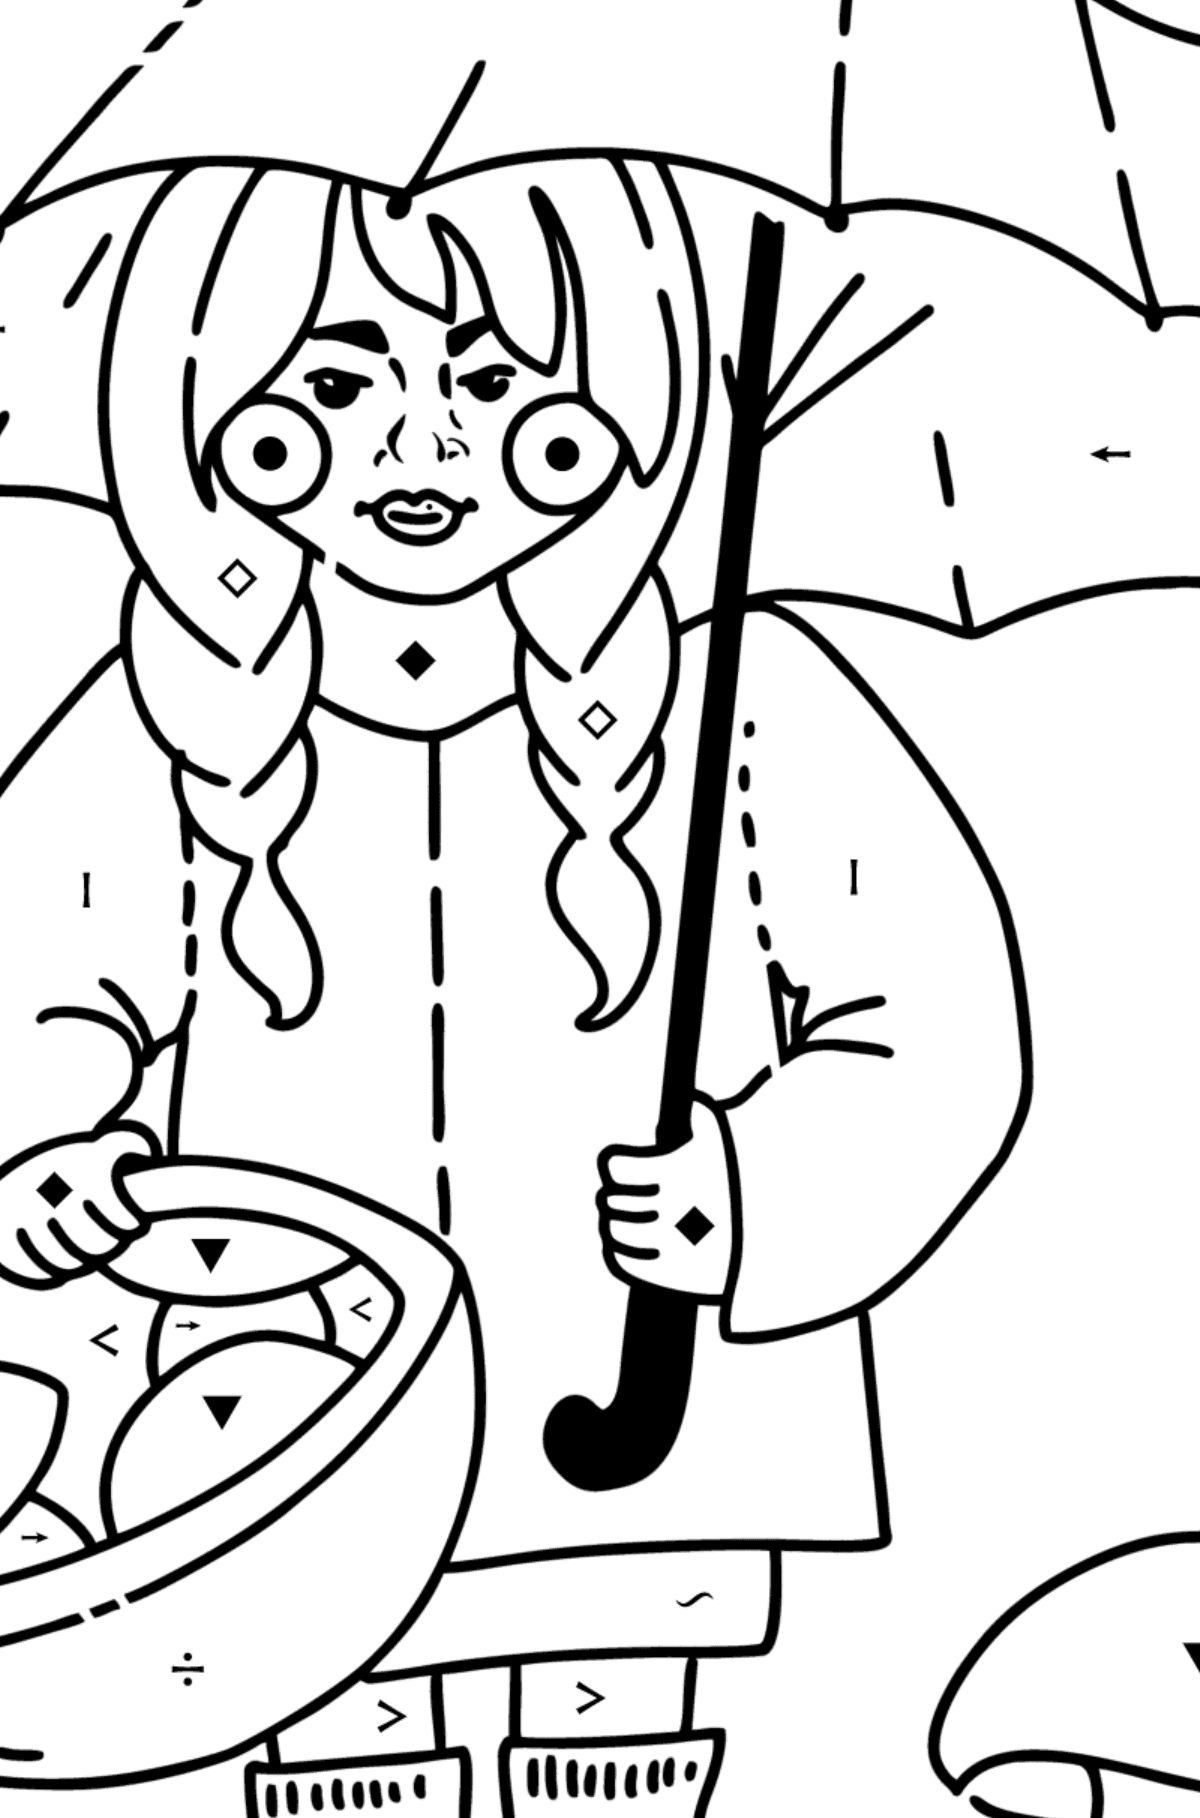 Coloring page - Girl picking mushrooms - Coloring by Symbols for Kids